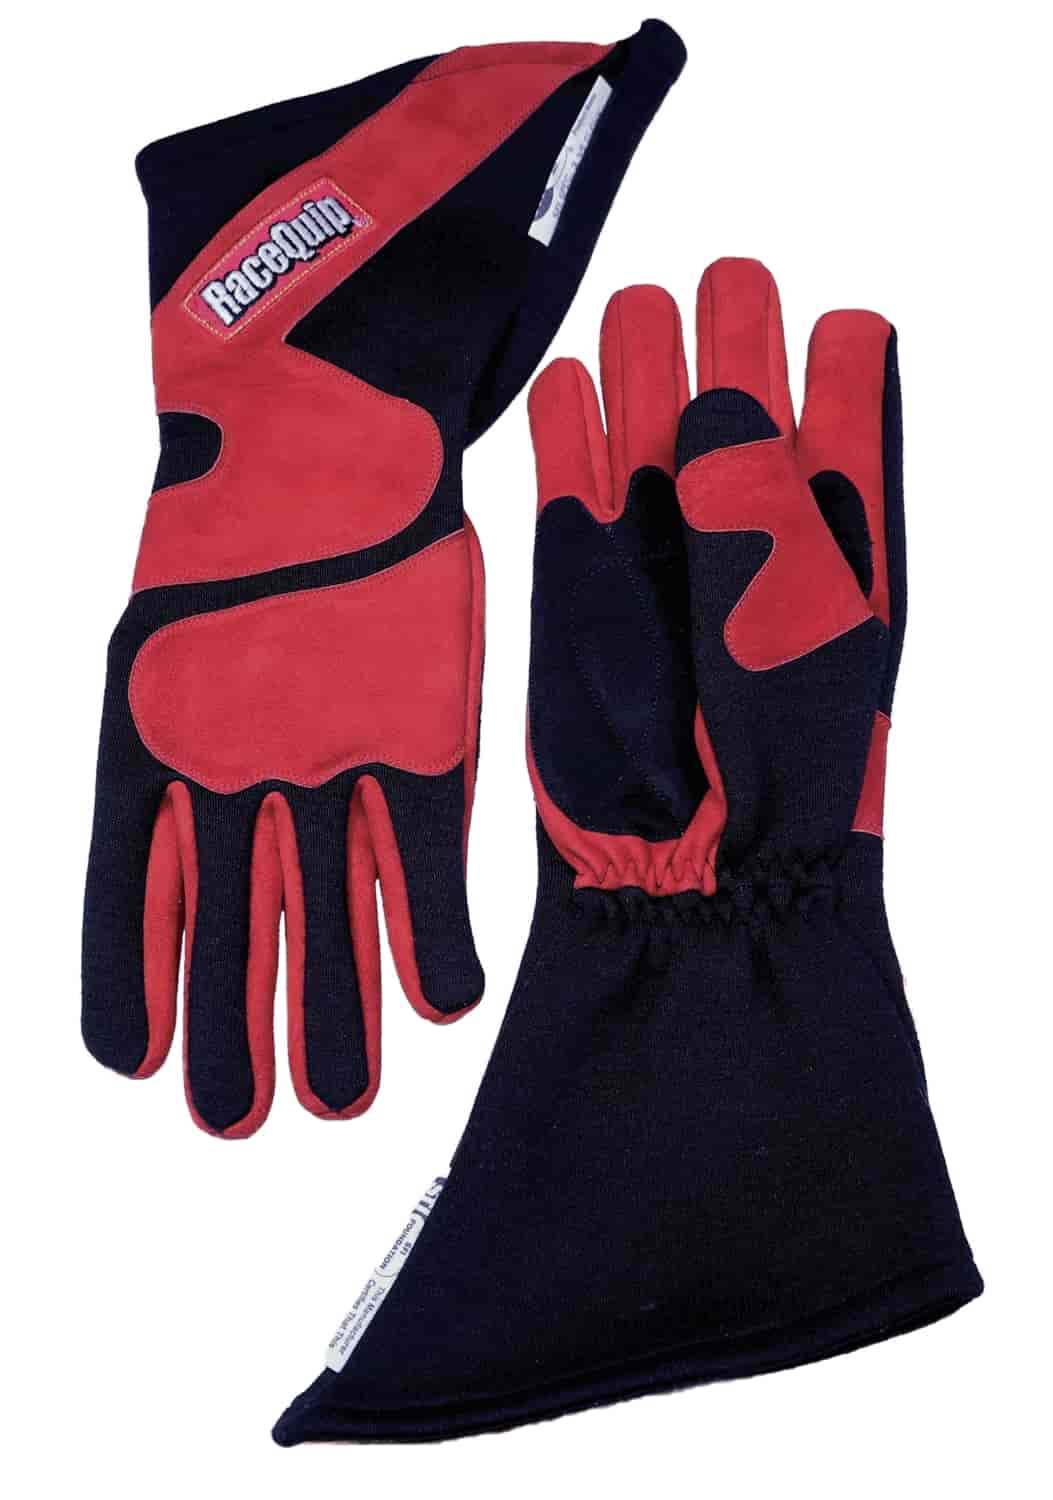 SFI-5 358 Series Long Angle Cut Driving Gloves Red/Black 2X-Large